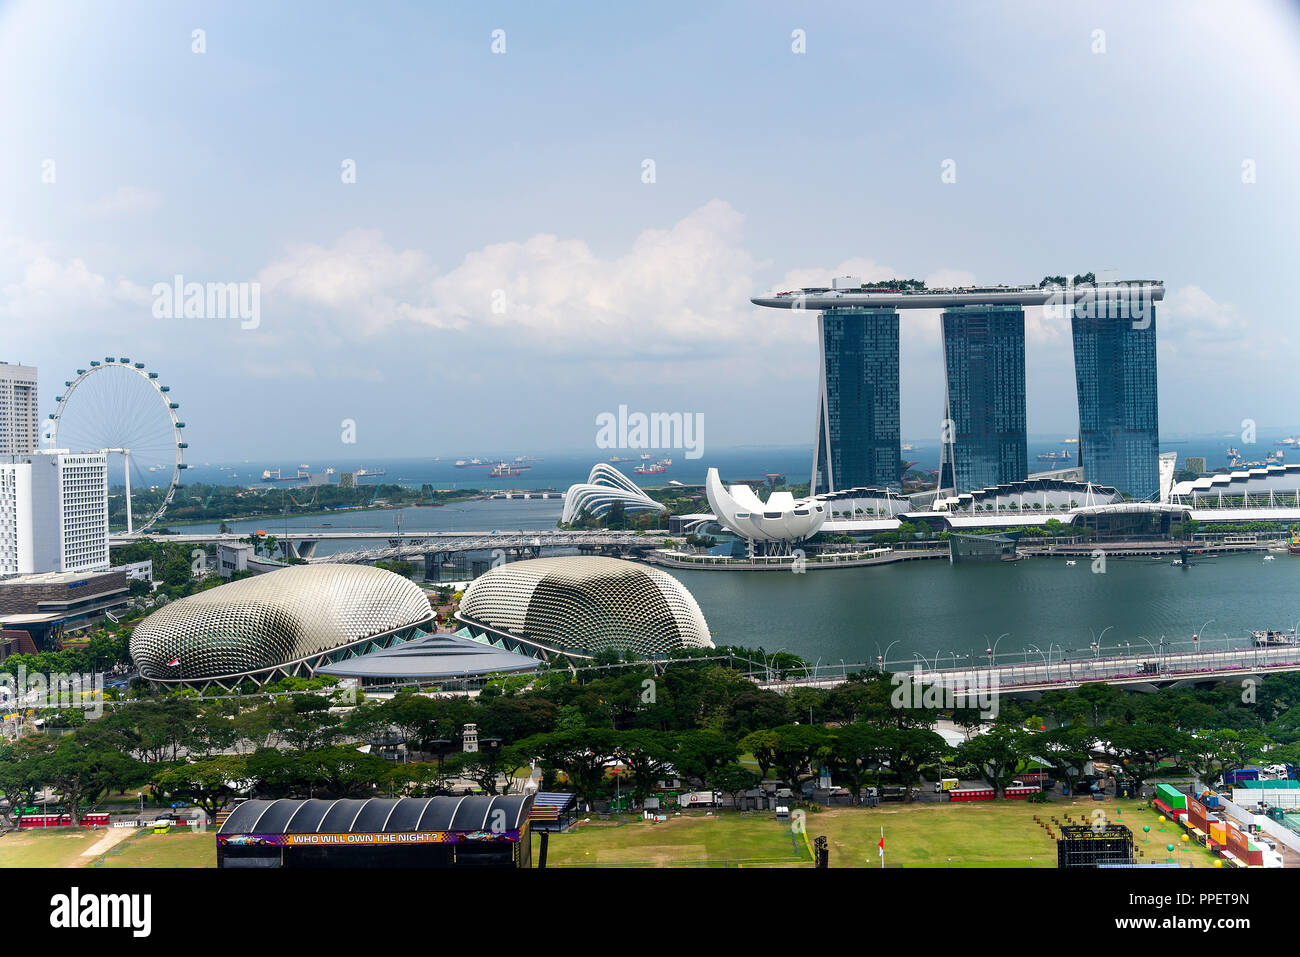 Aerial View of  The Padang, Esplanade Theatres, Singapore Flyer, Artscience Museum, Marina Bay Sands Hotel Complex Republic of Singapore Asia Stock Photo